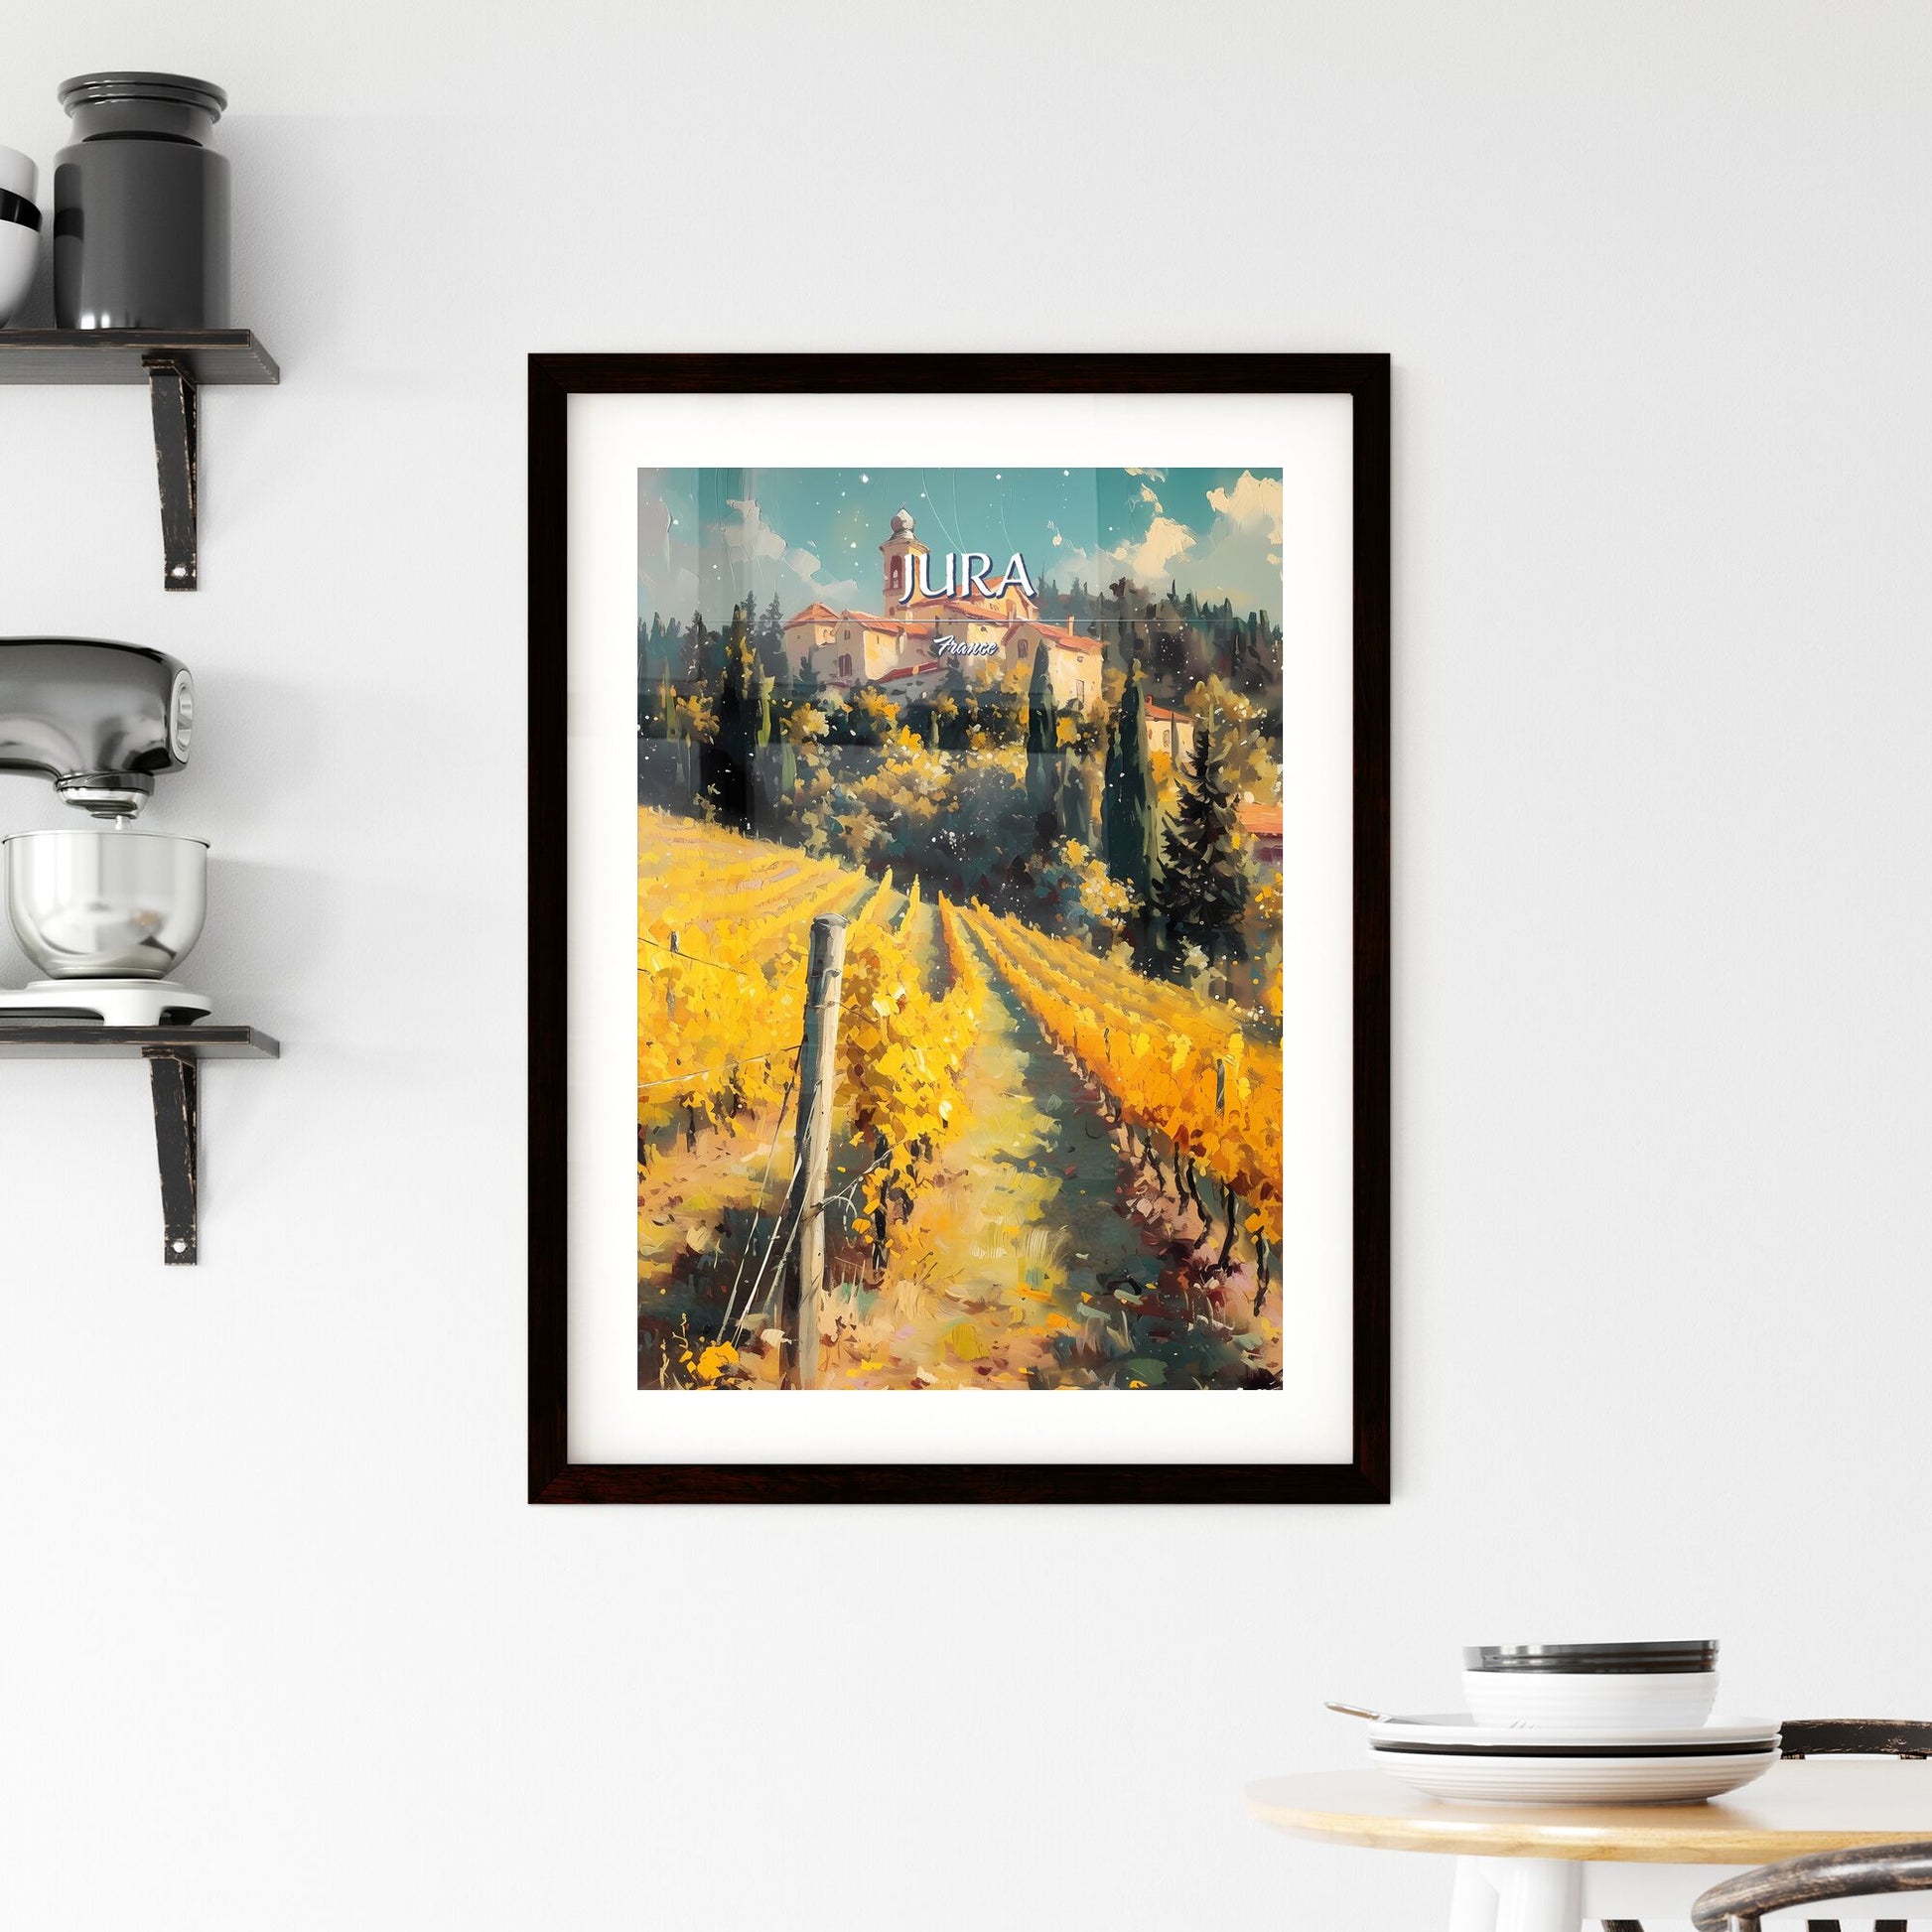 Jura, France - Art print of a house on a hill with trees and a vineyard Default Title